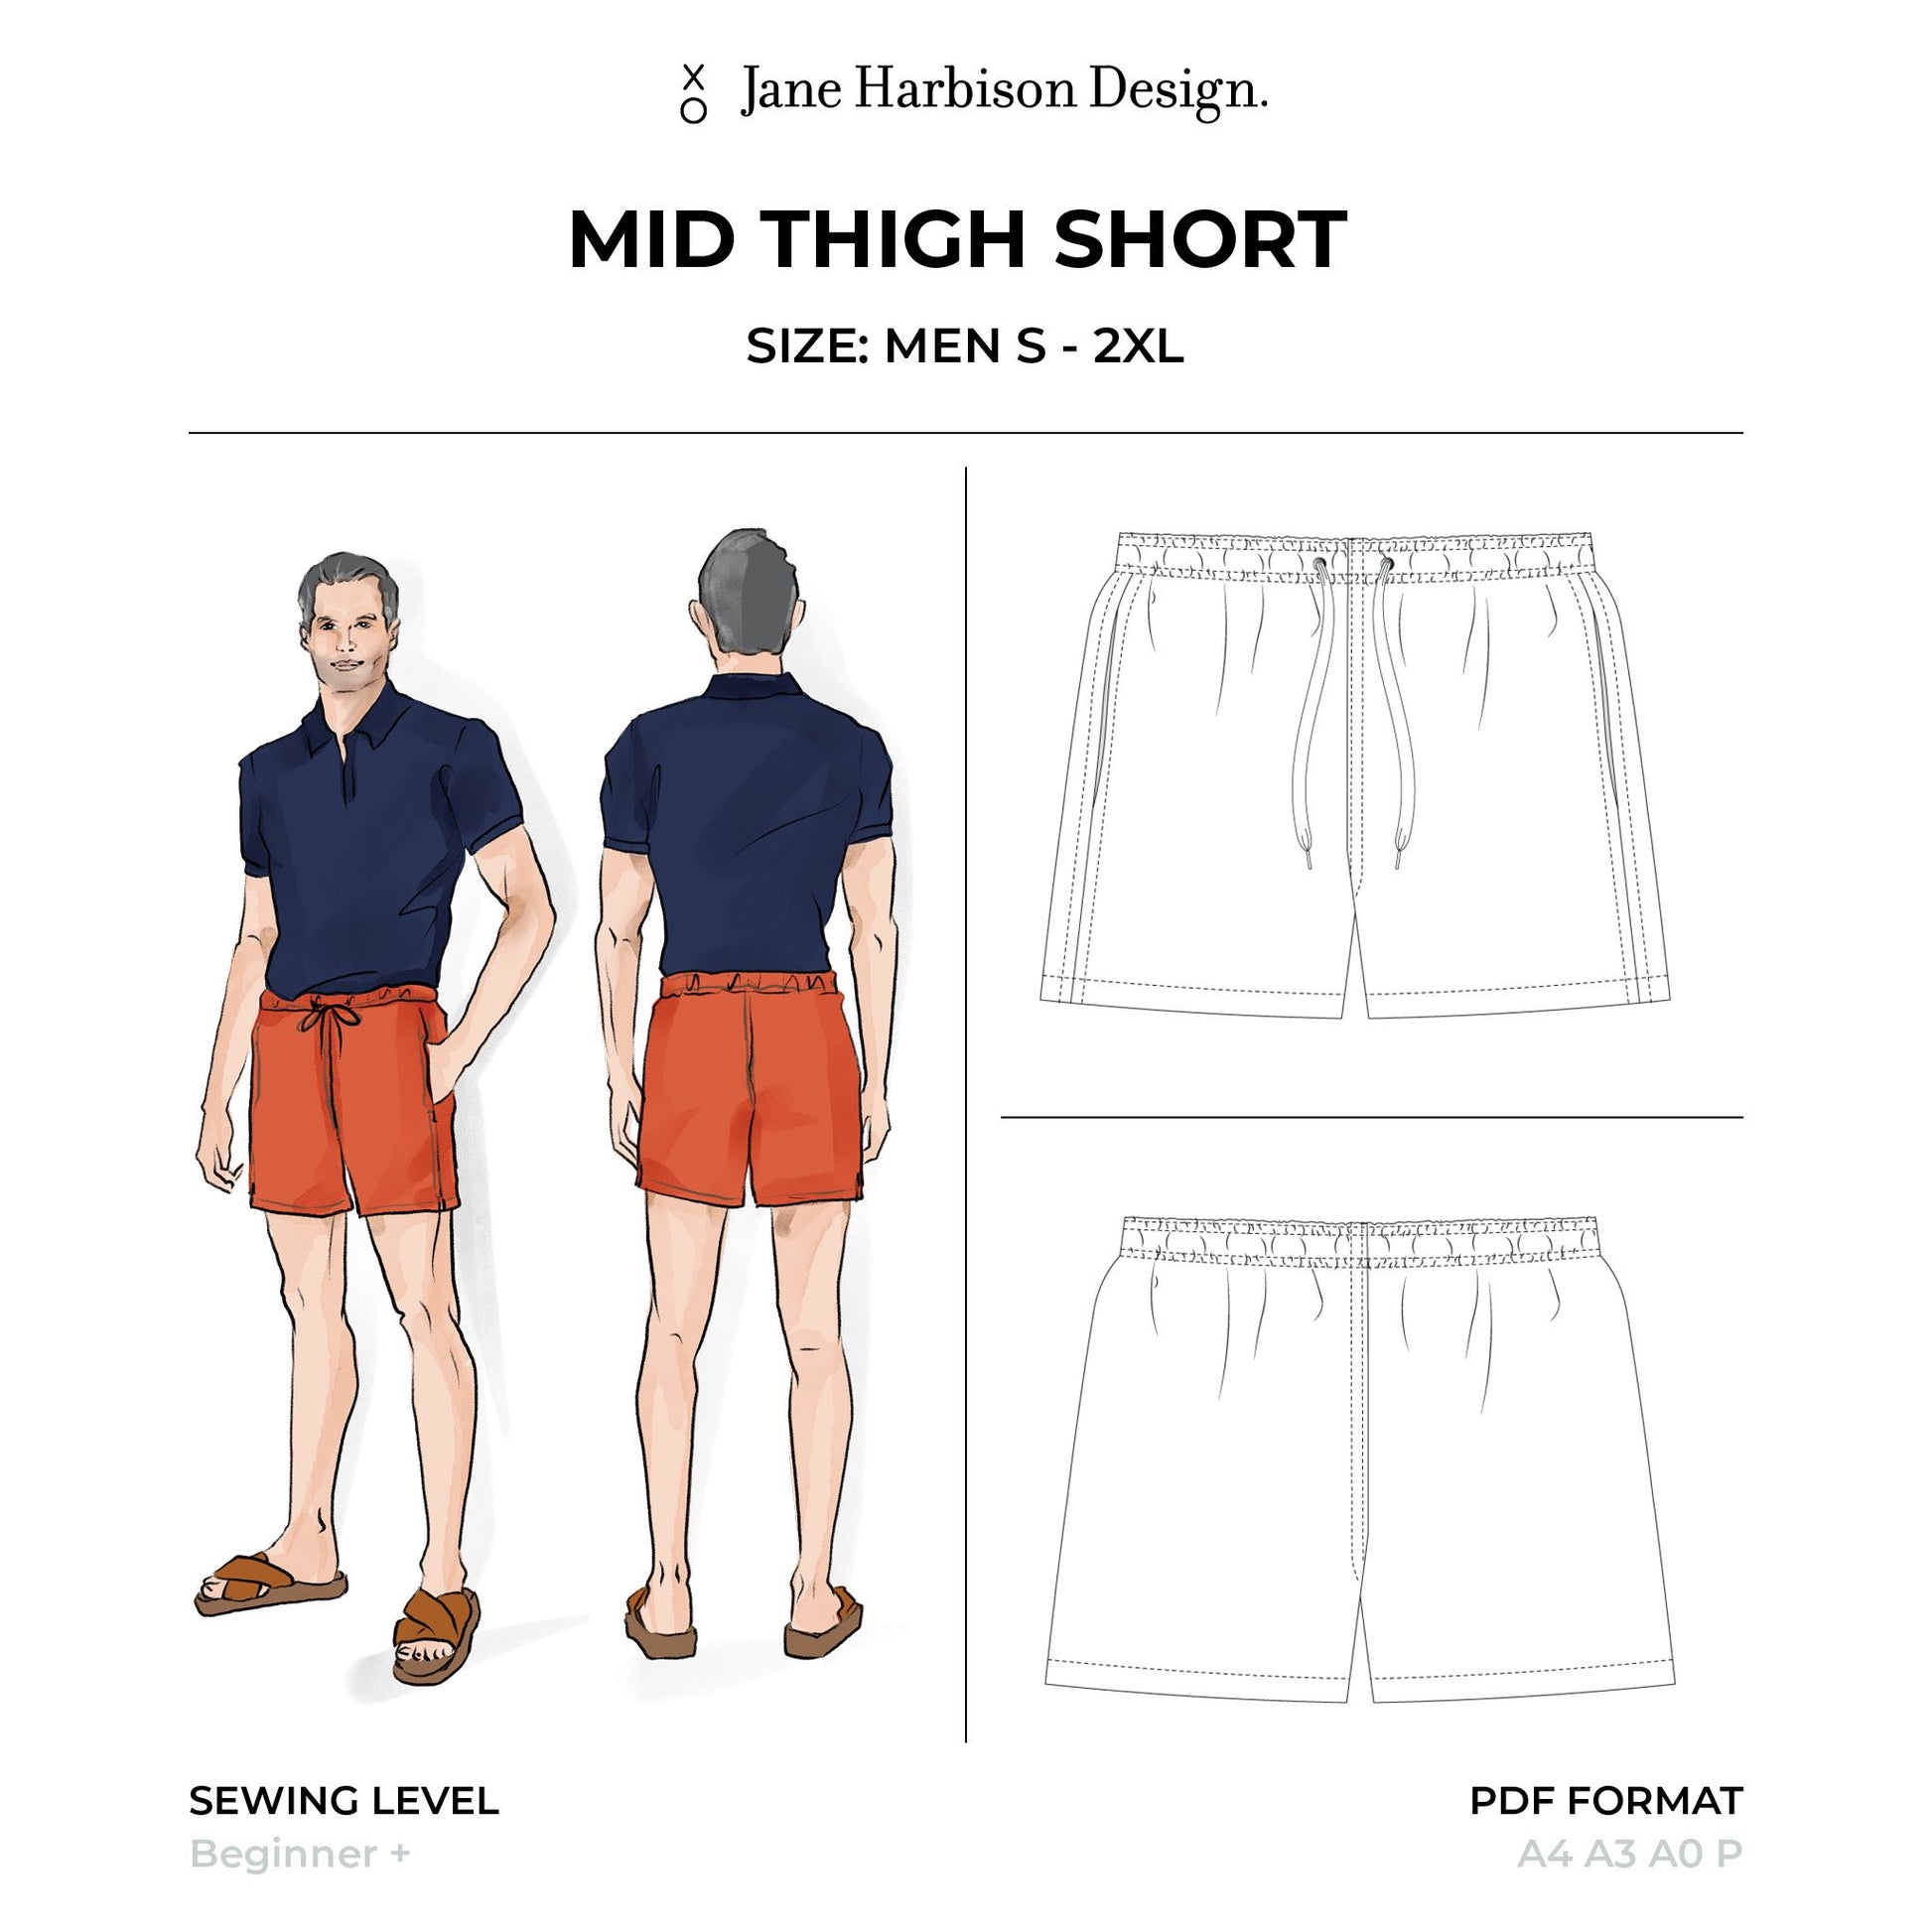 Men's Mid-Thigh Short Sewing Pattern For Beginners - Size Men S to 2XL –  Jane Harbison Design